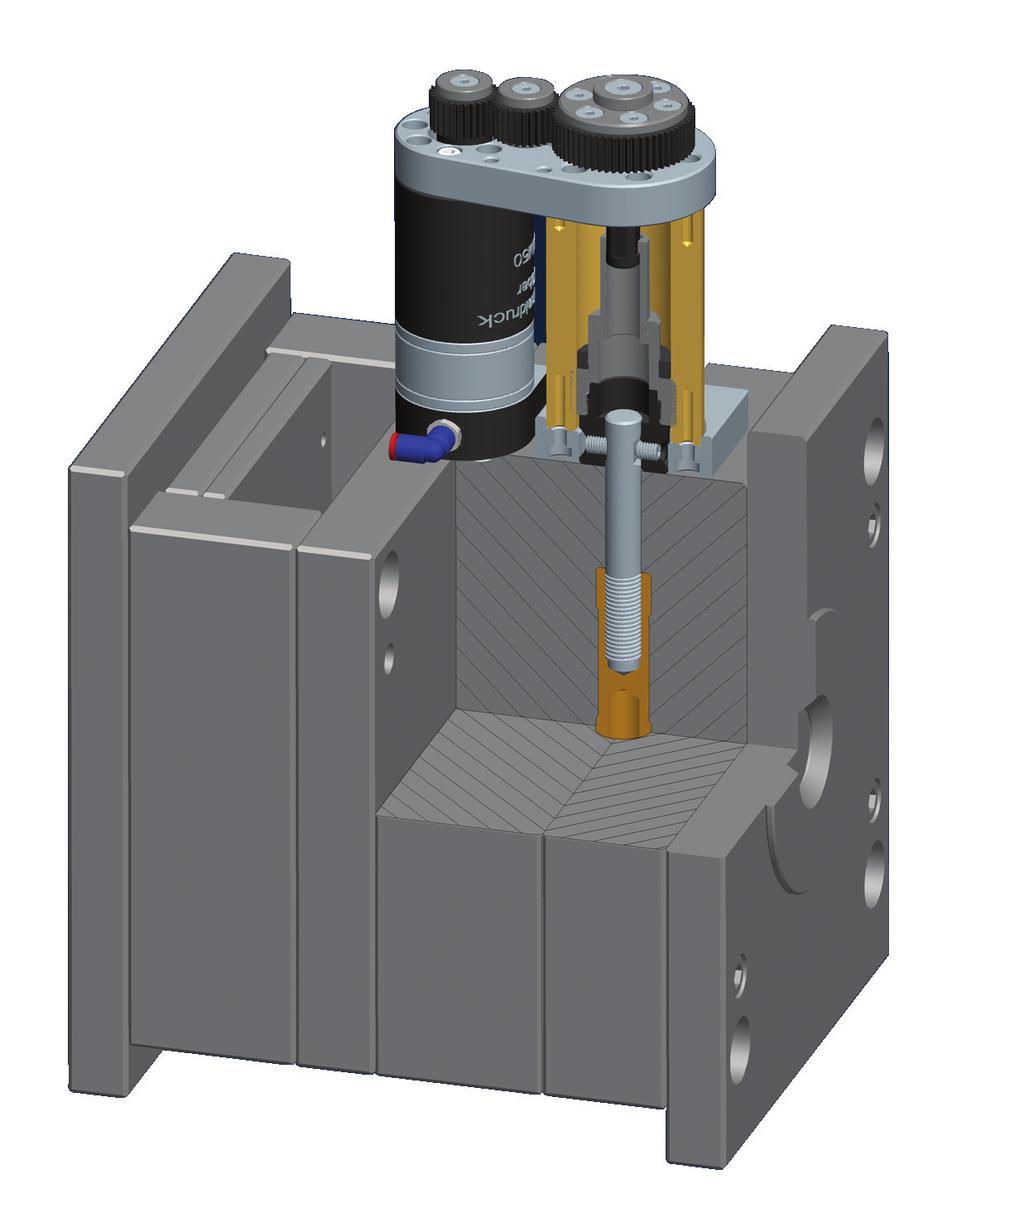 The Threadformer Features and Specifications Powerful Hydraulic Motor Precision Core stopping Compact and sturdy design Unscrews 70 mm MADE IN THE USA Complete single unit Threadformer installation.